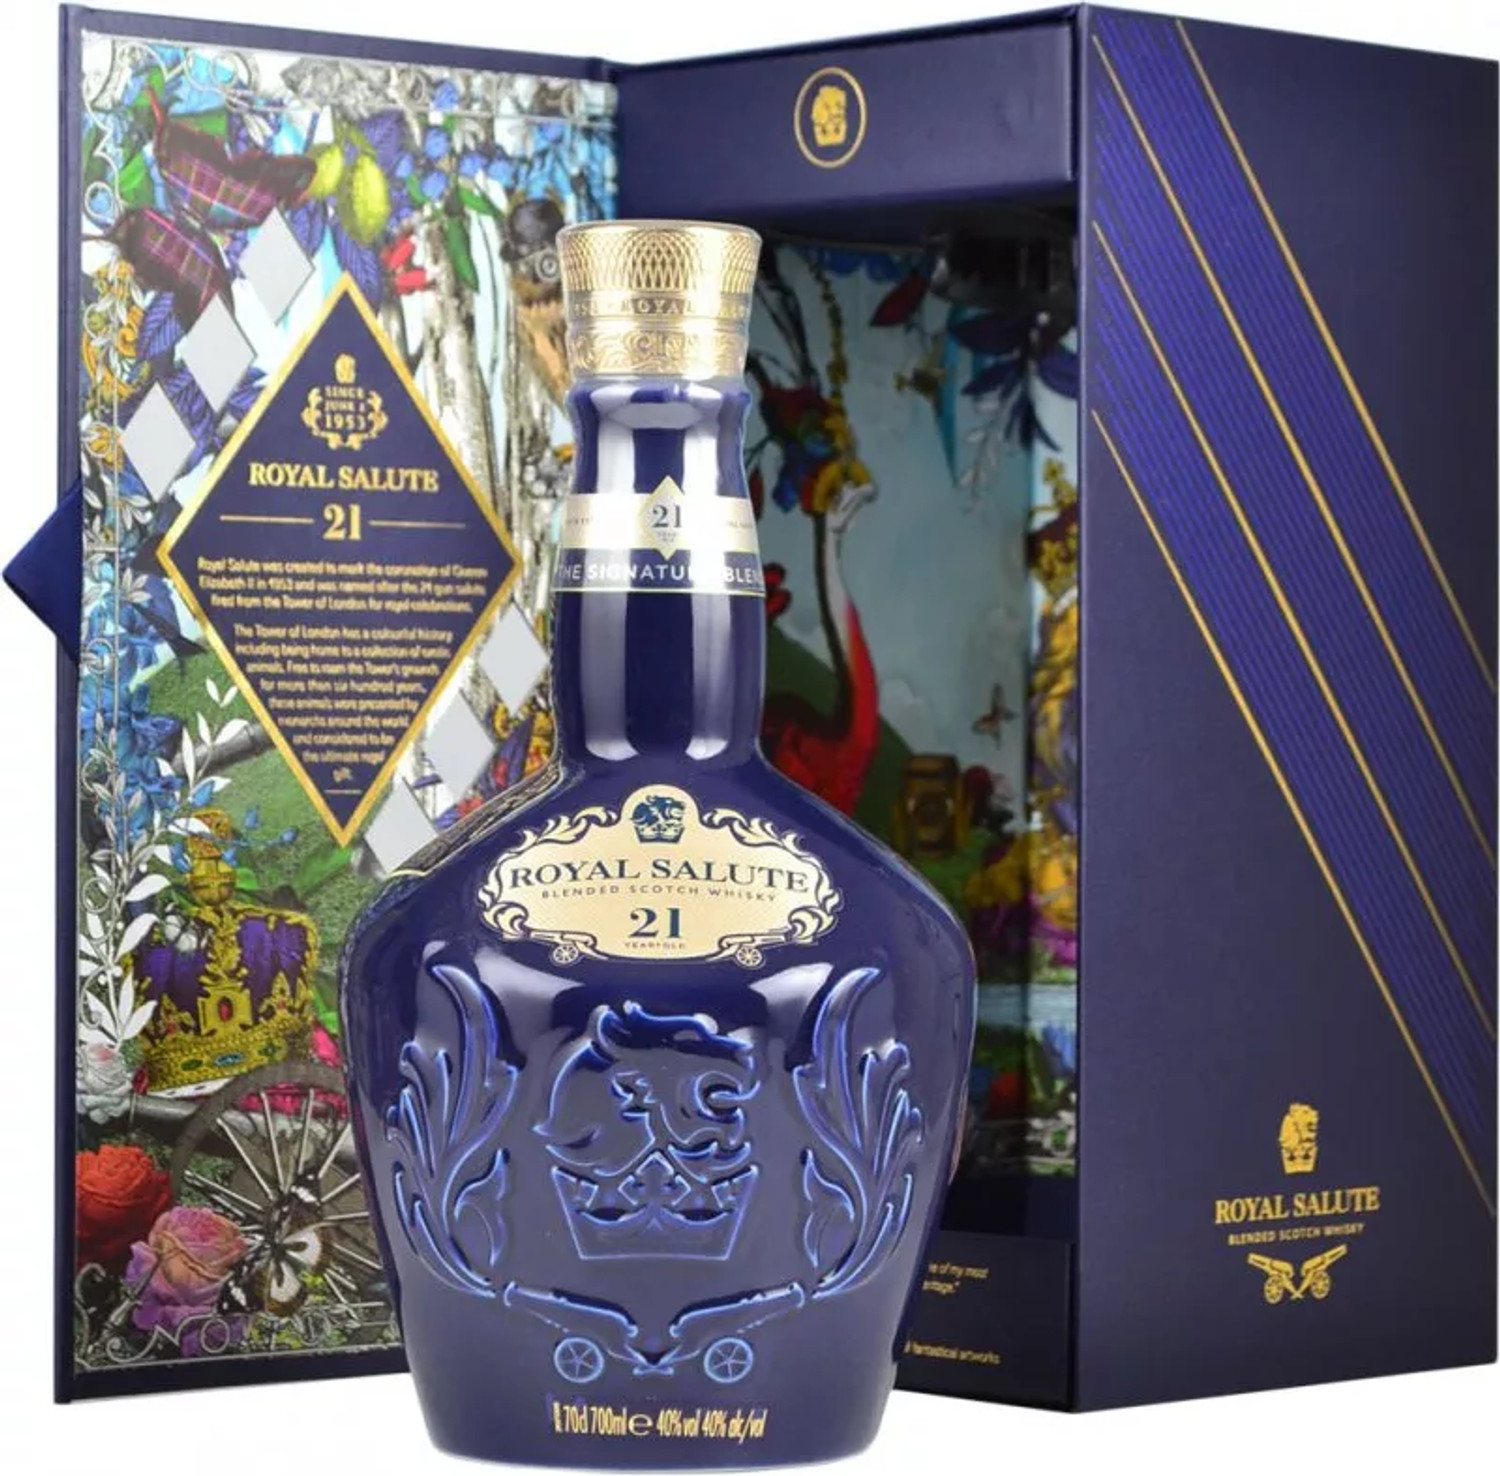 Chivas Royal Salute  Year Old cl   Champagne One